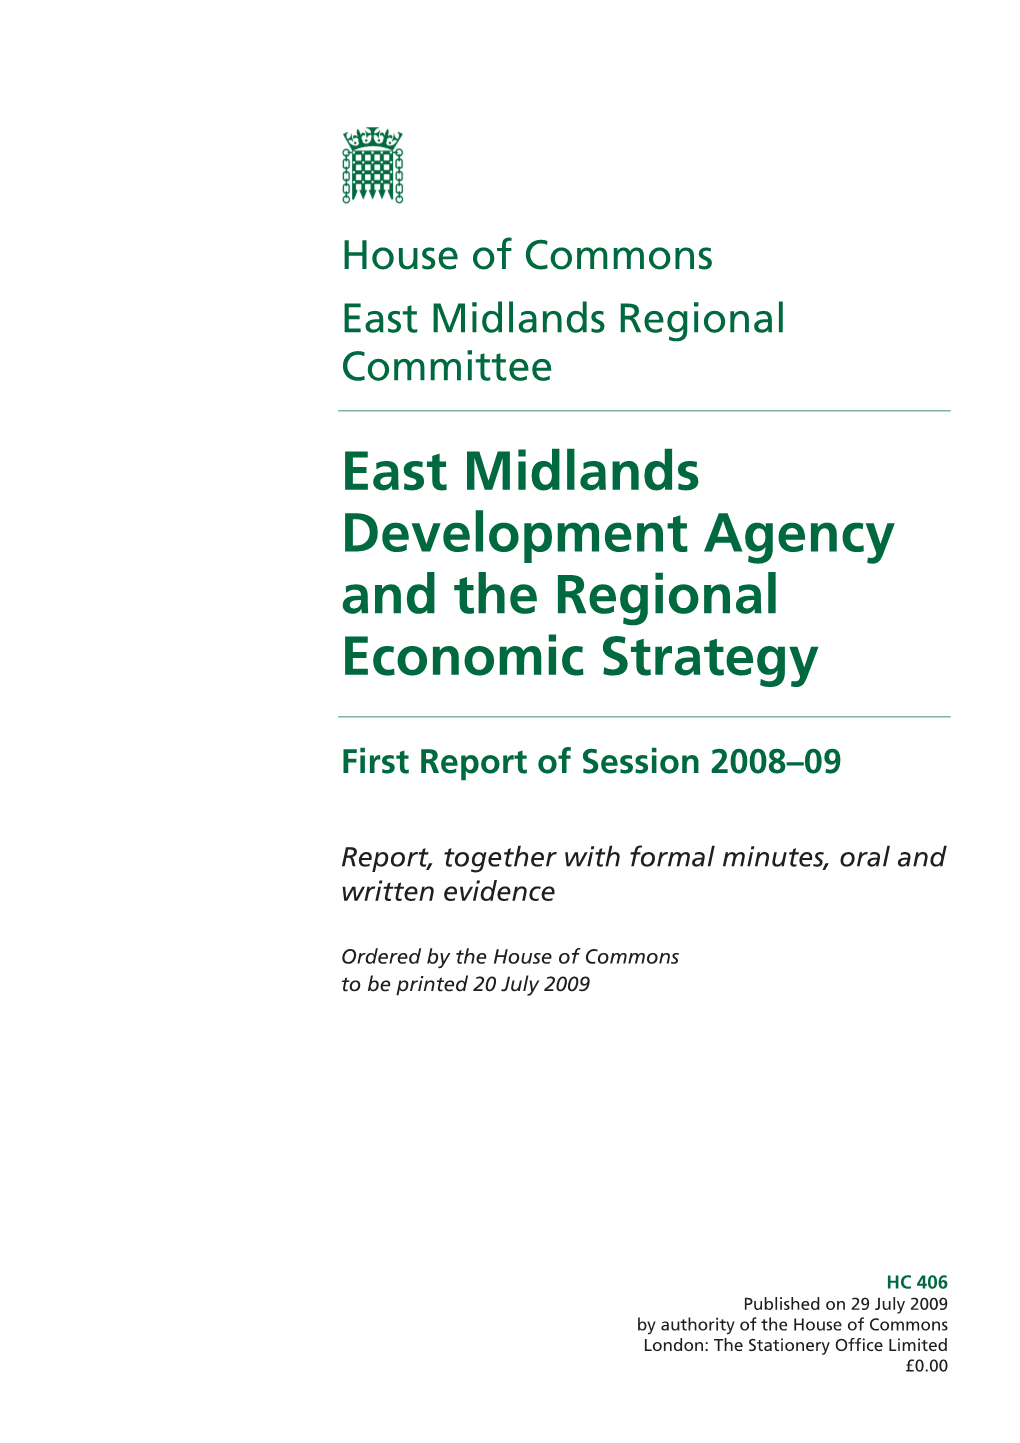 East Midlands Development Agency and the Regional Economic Strategy